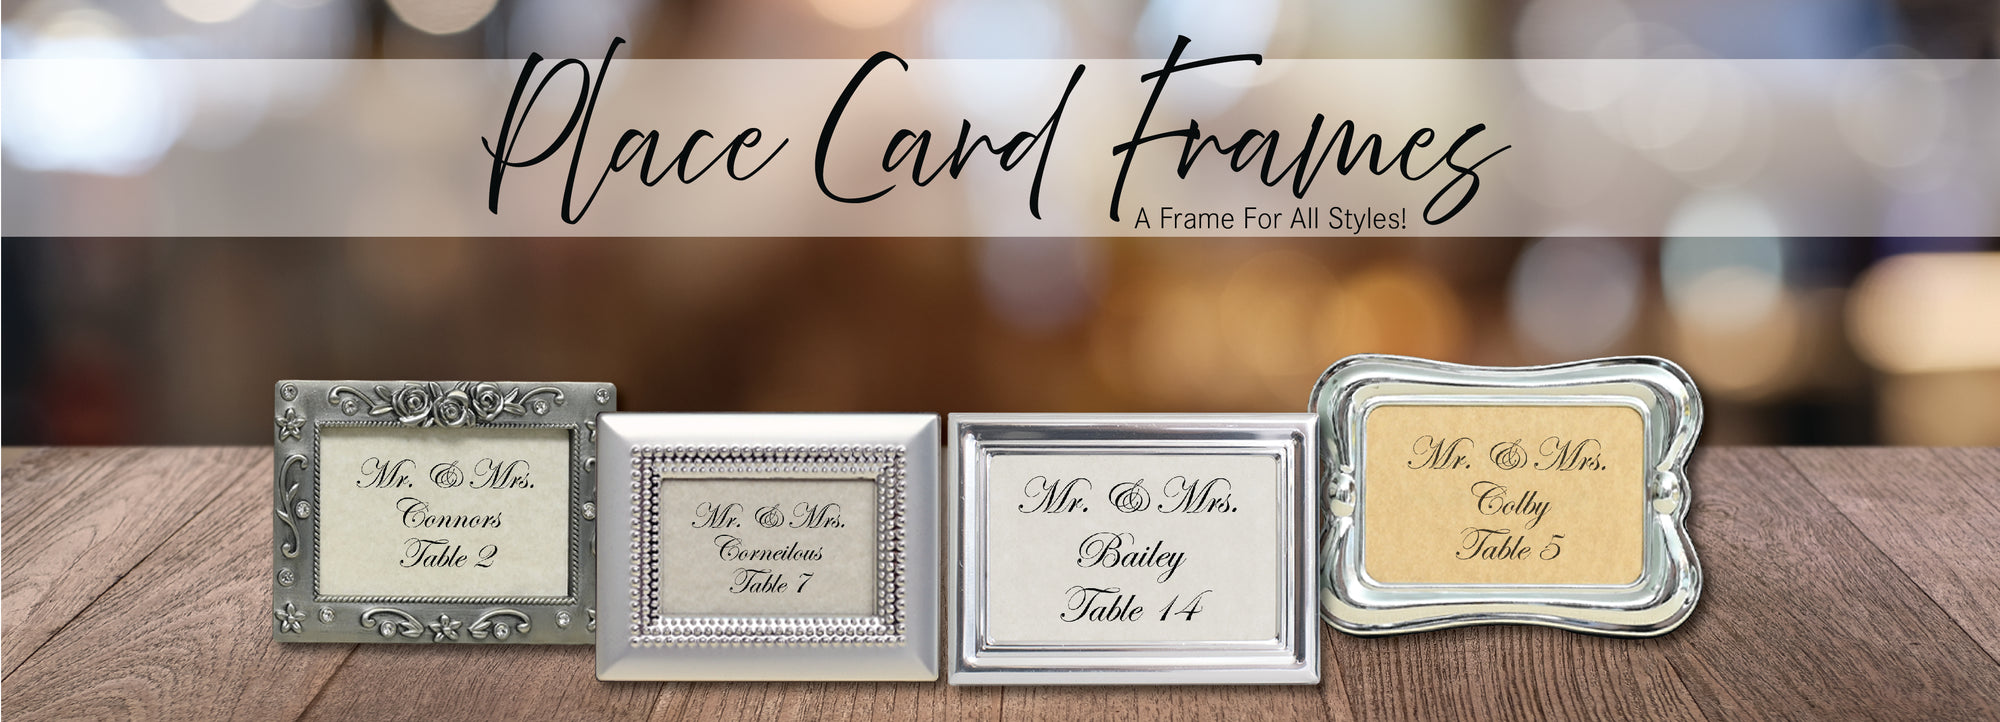 Place Card Frames